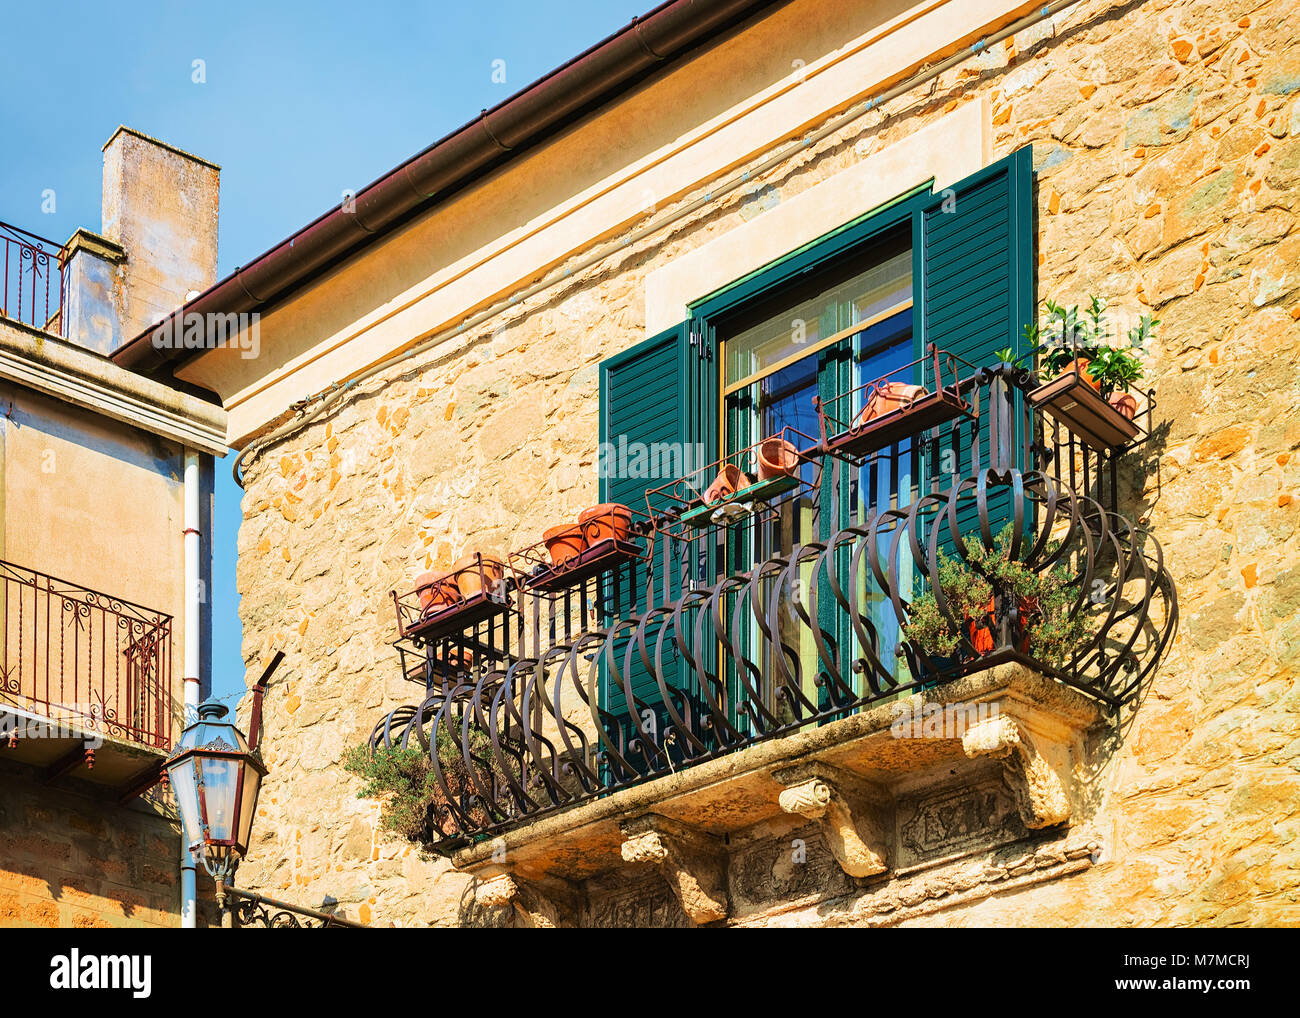 Balcony of the old house in Aidone, Enna province, Sicily in Italy Stock Photo